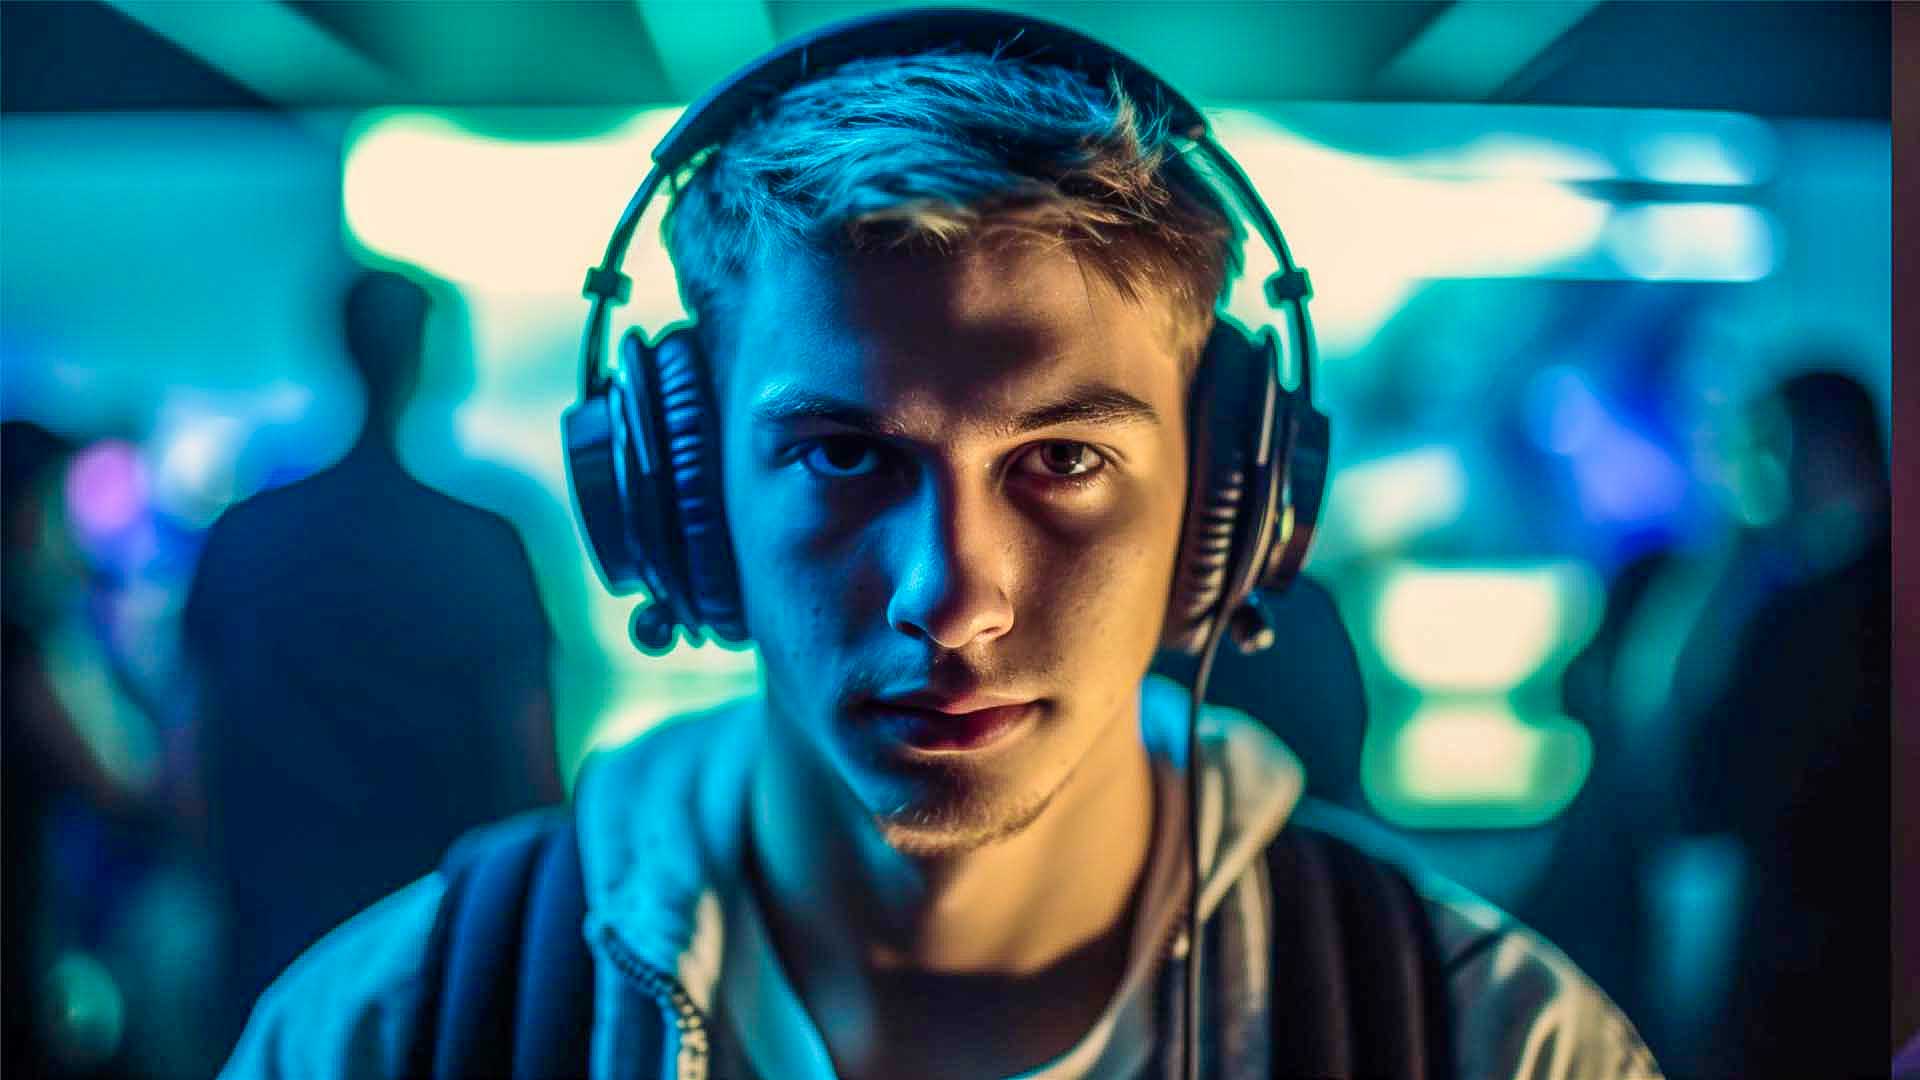 Gamer looking into the camera with focused eyes, how not to lose focus while gaming